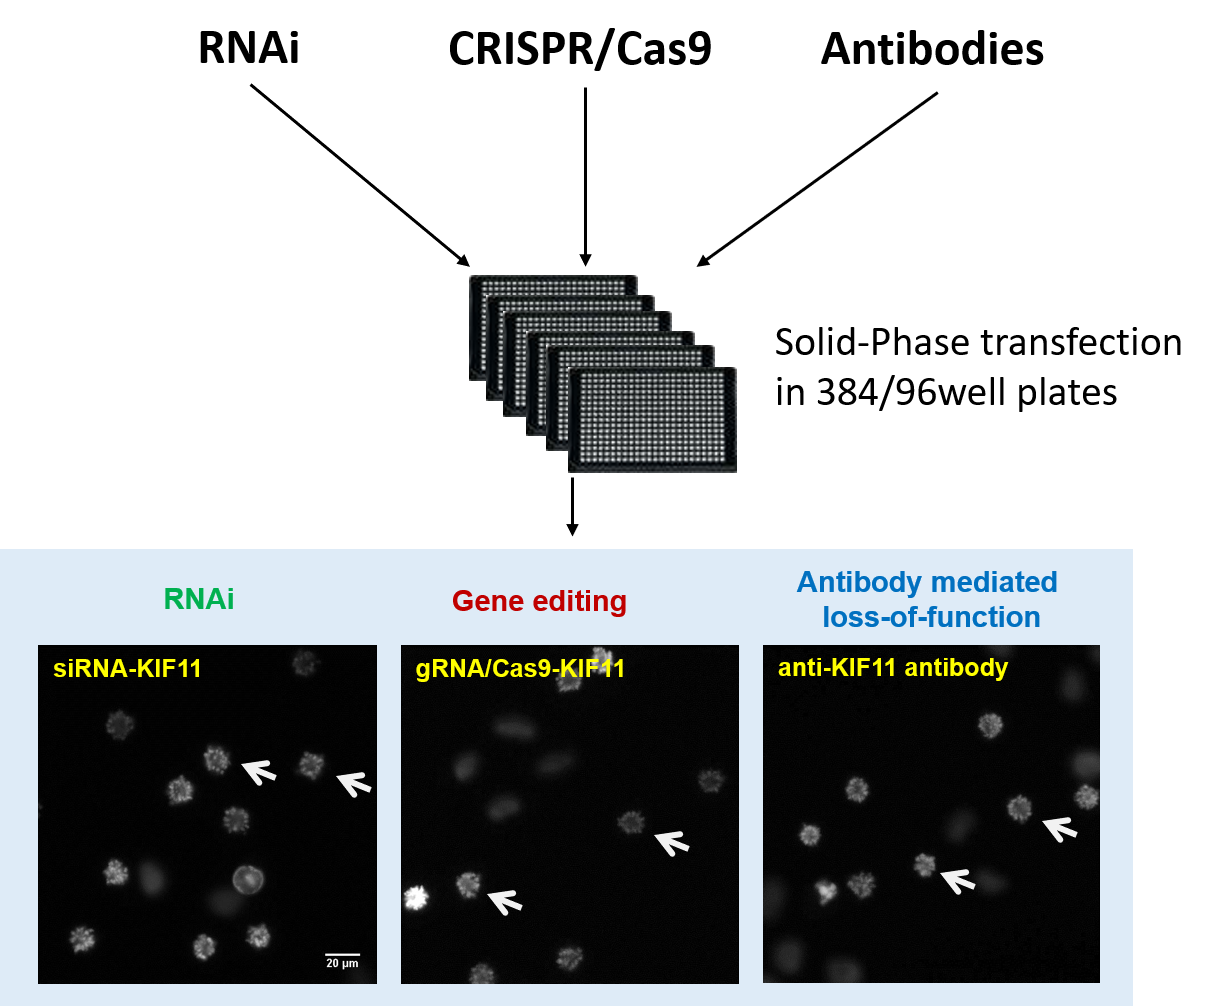 Solid phase transfection in multiwell plates and cell arrays for DNA knock-out by CRISPR, protein knock-down by antibodies or gene silencing by RNAi. Arrows: Nuclei of cells in the expected phenotype (e.g. cell cycle arrest) after transfection.